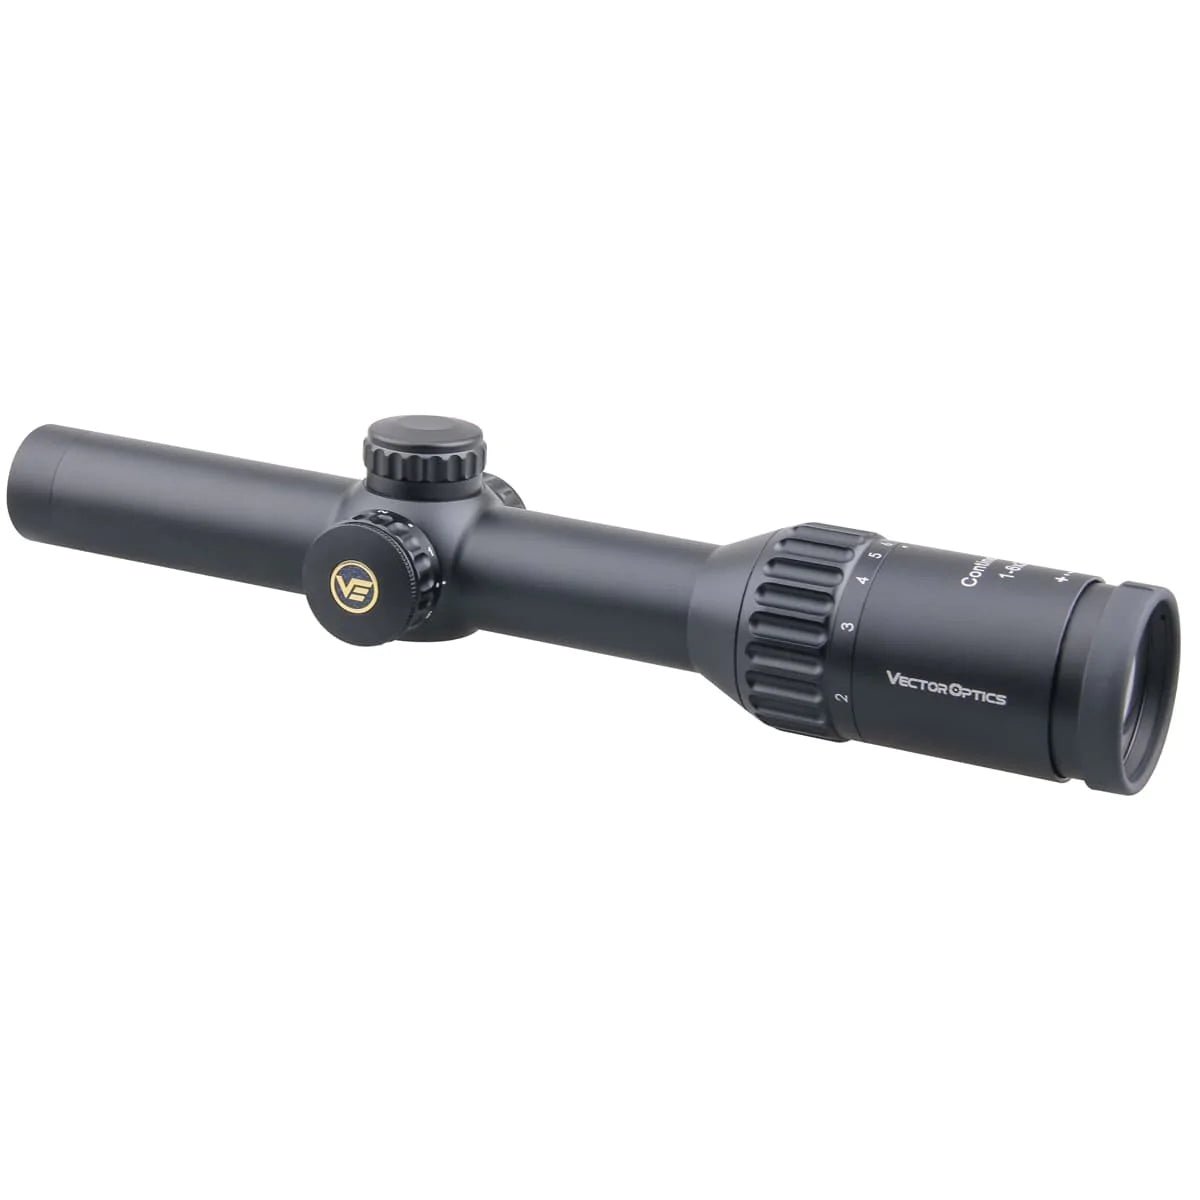 Continental, 1-6 X 24 LPVO, SFP, Riflescope for Hunting and Competition